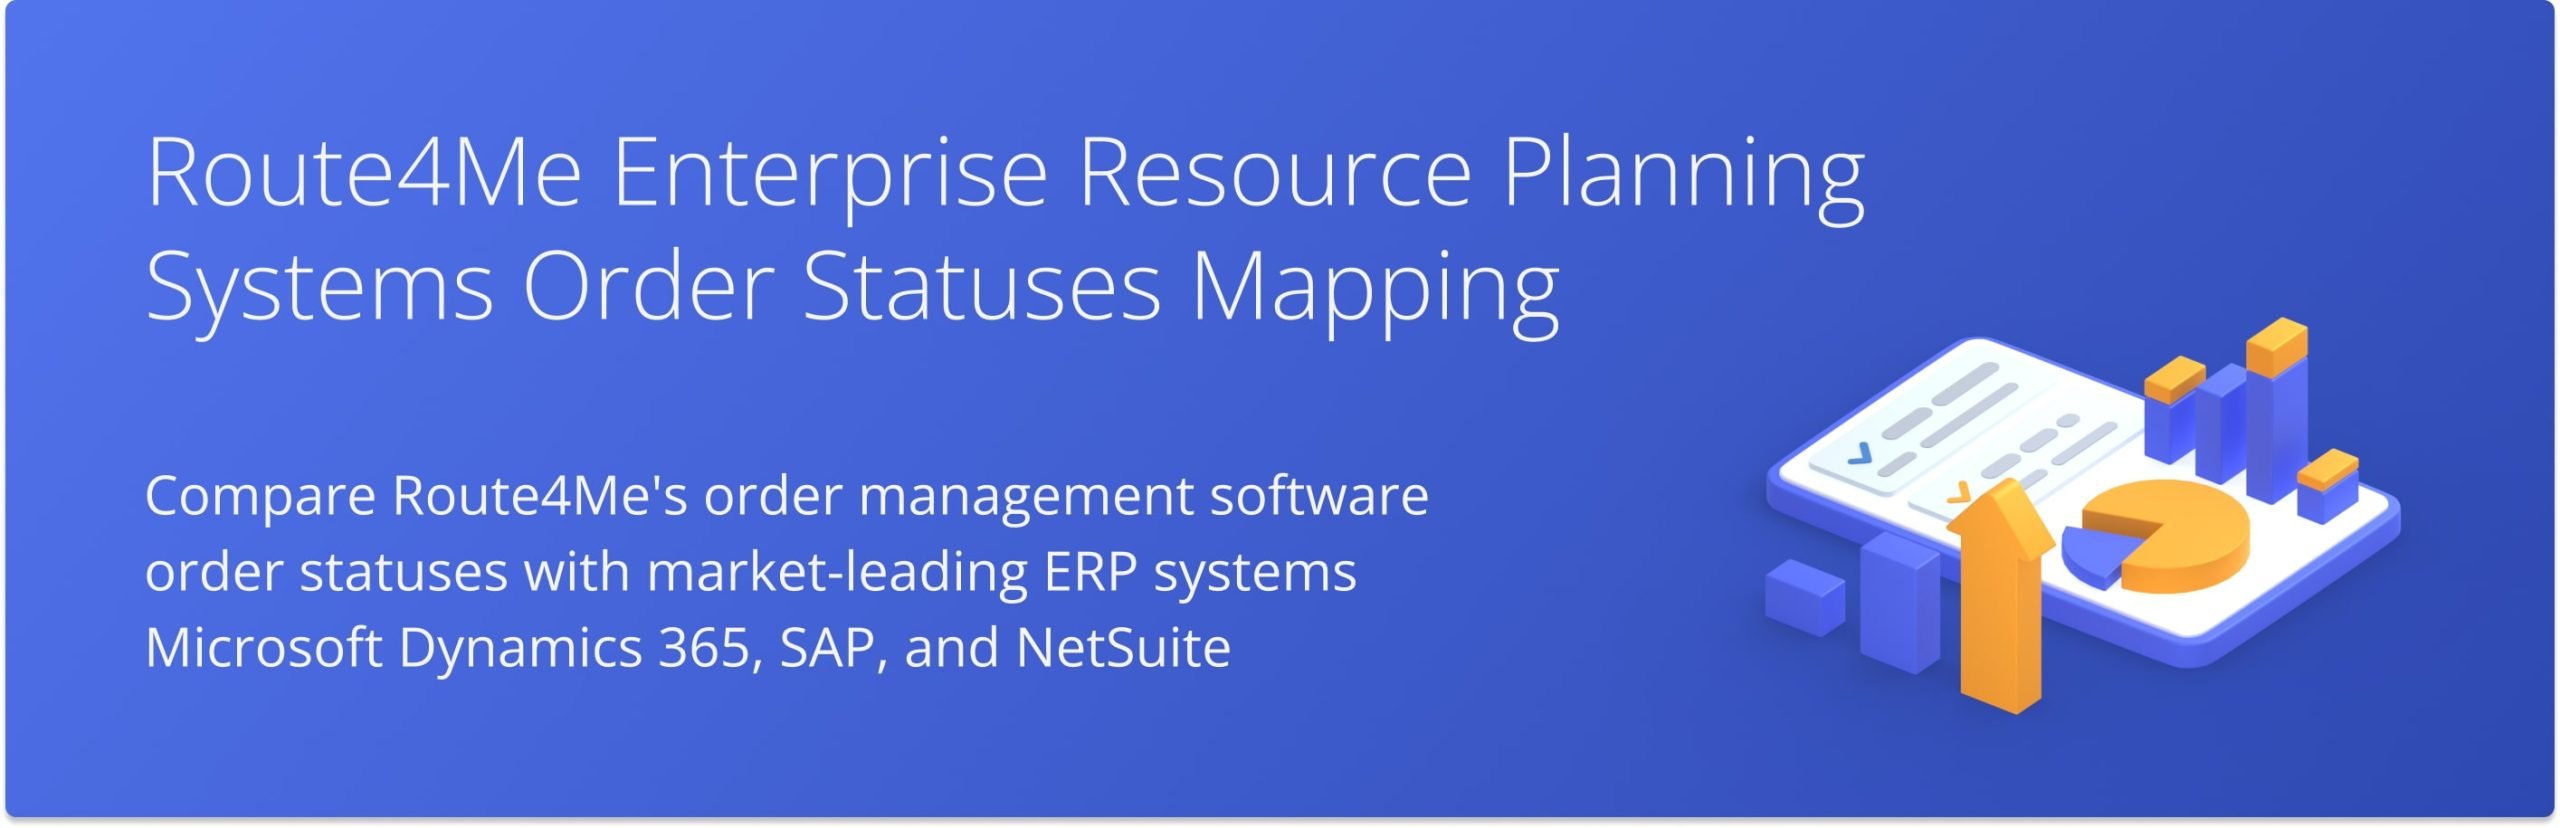 Compare order statuses within Route4Me's Order Management System and other market-leading ERP systems, such as Microsoft Dynamics 365, SAP, and NetSuite.